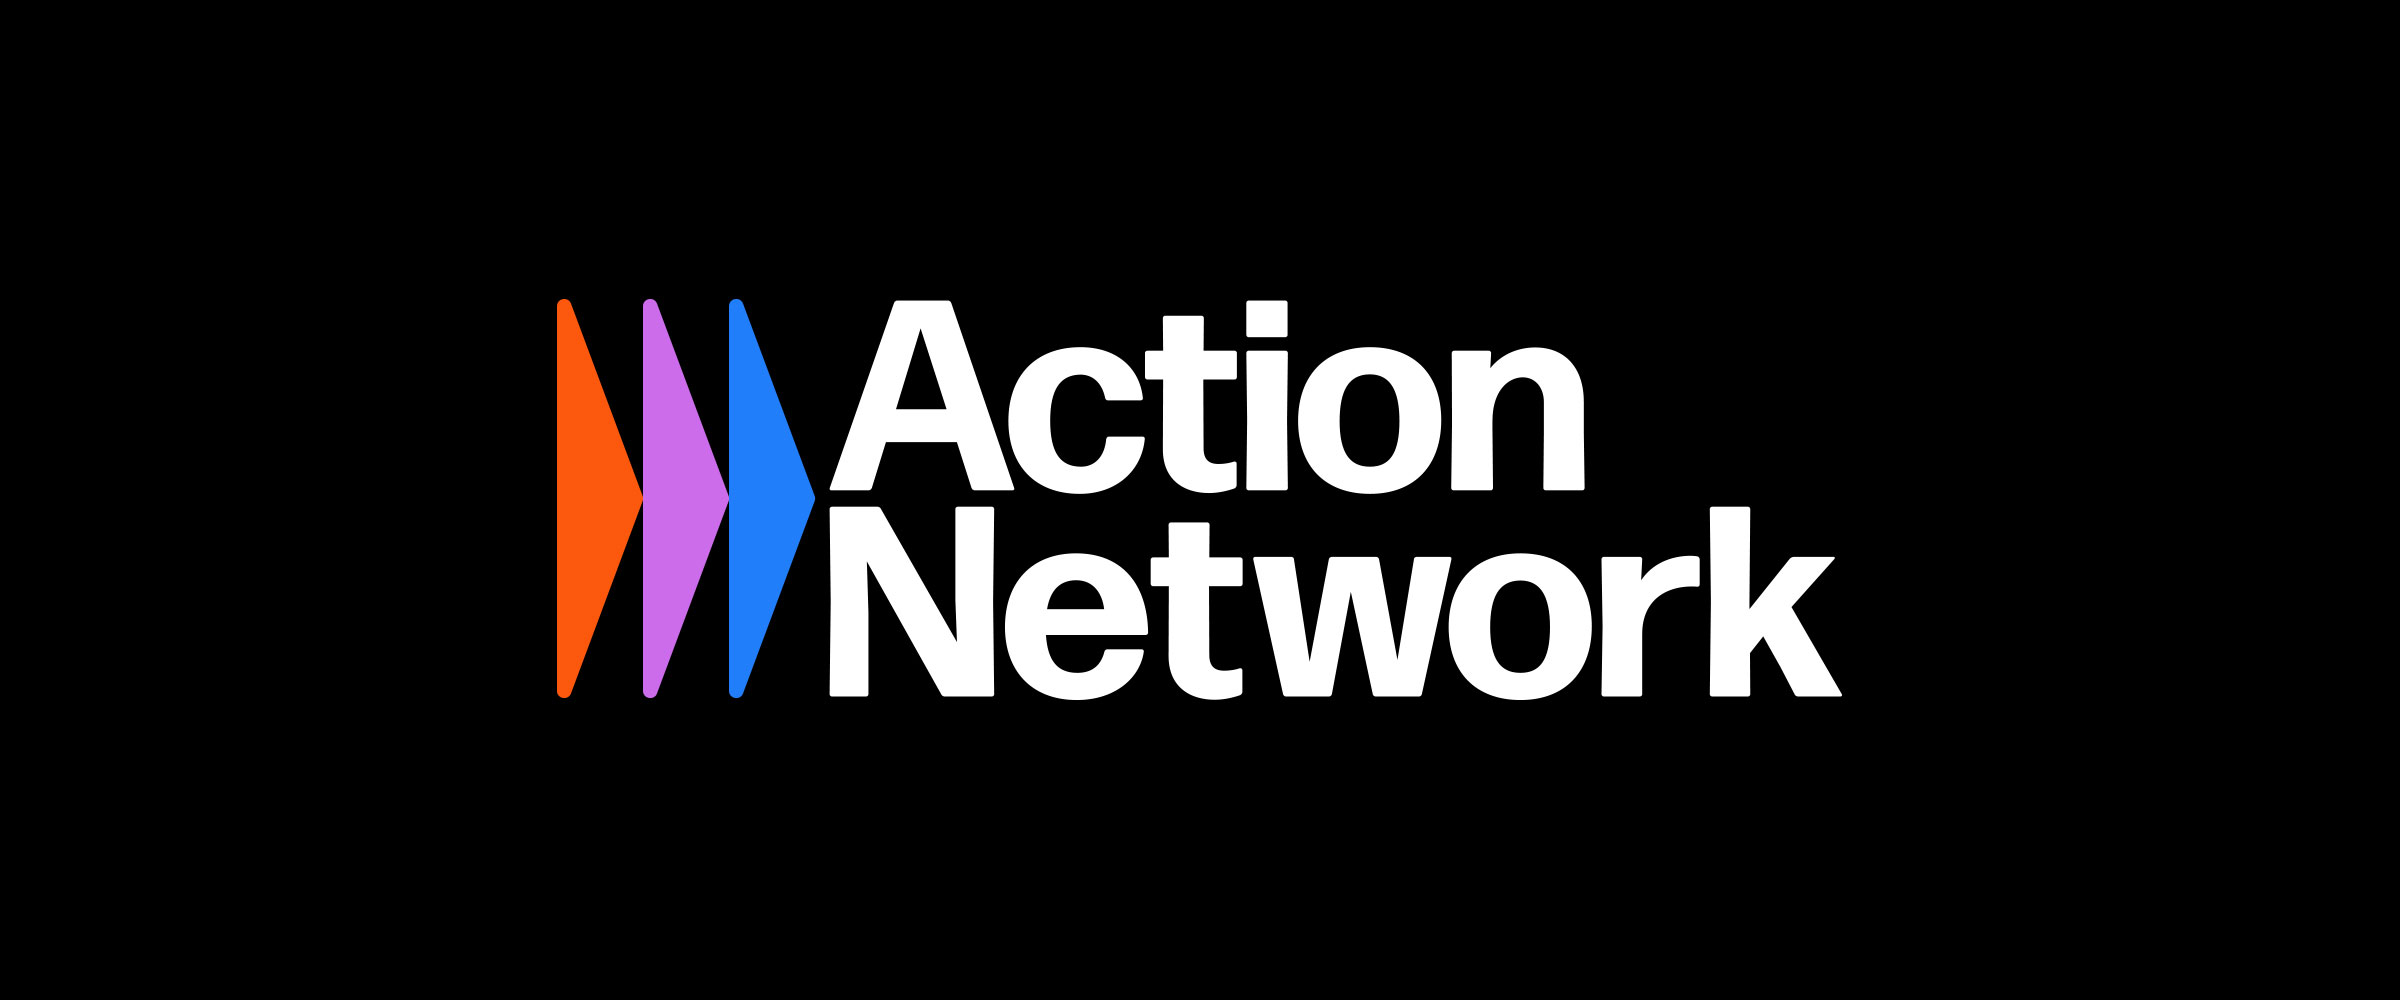 The new Action Network logo